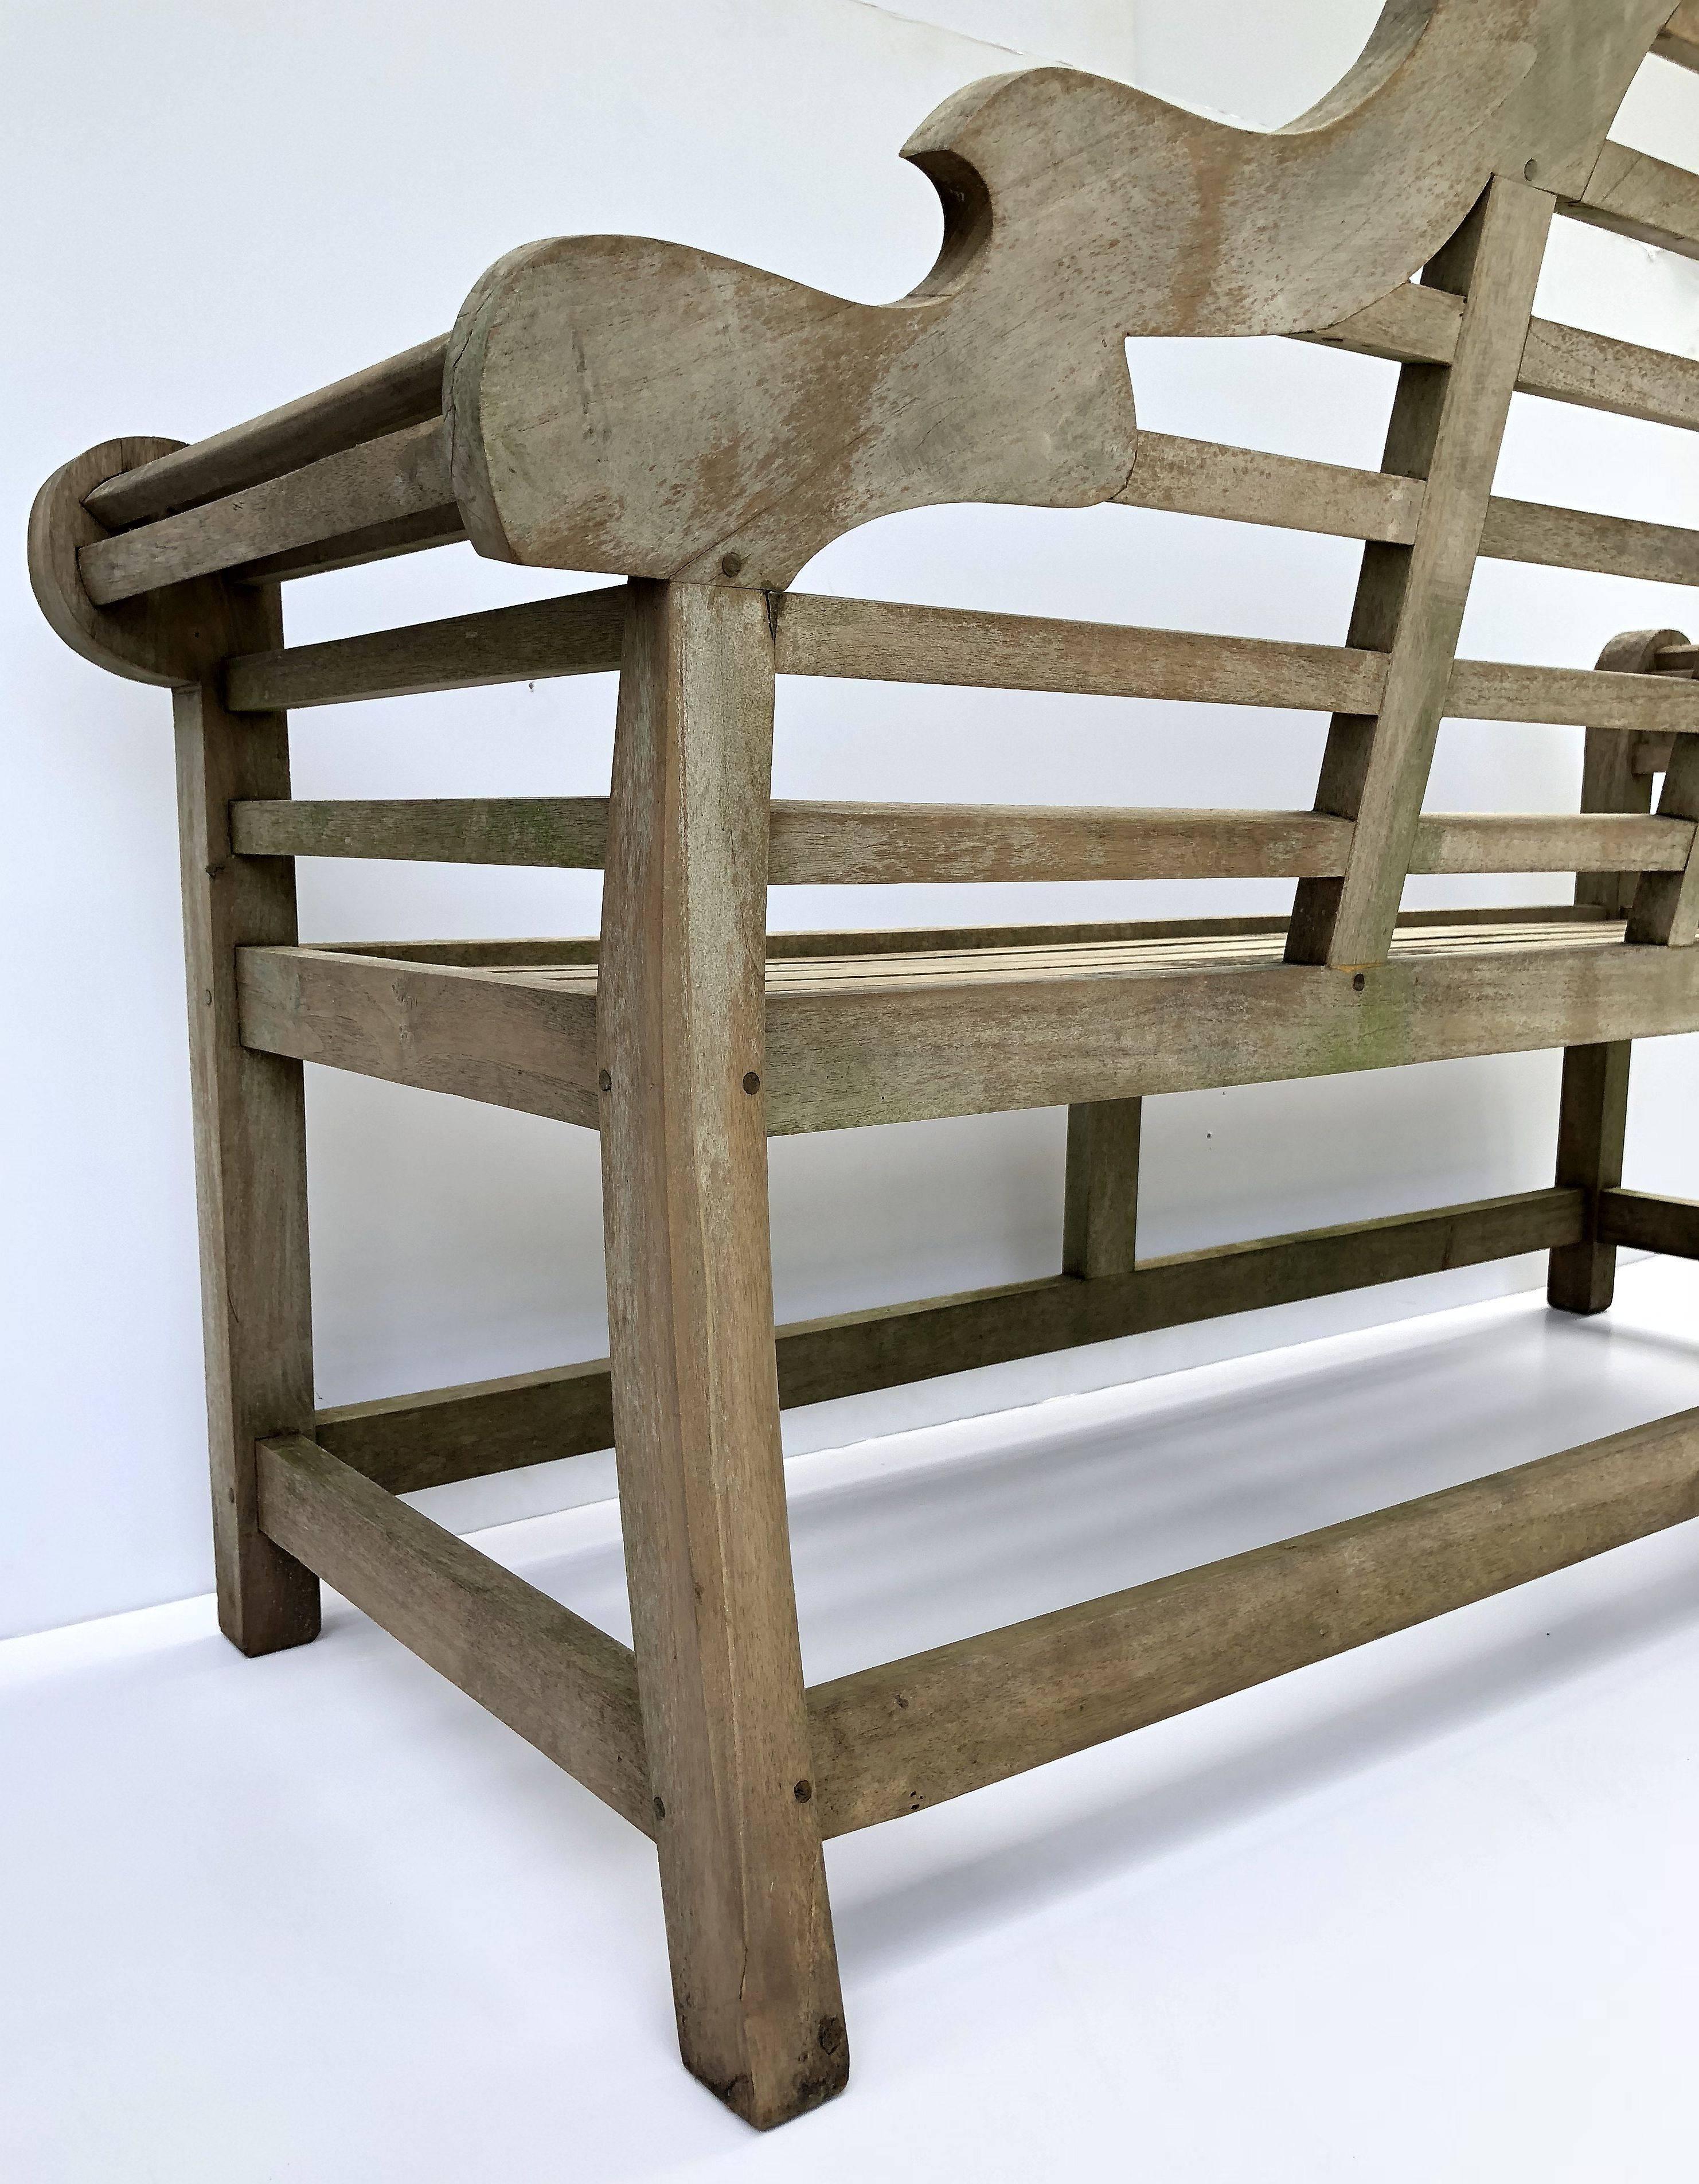 Wood Lutyens Style Garden Bench Seats of Teak from England 'Individually Priced'